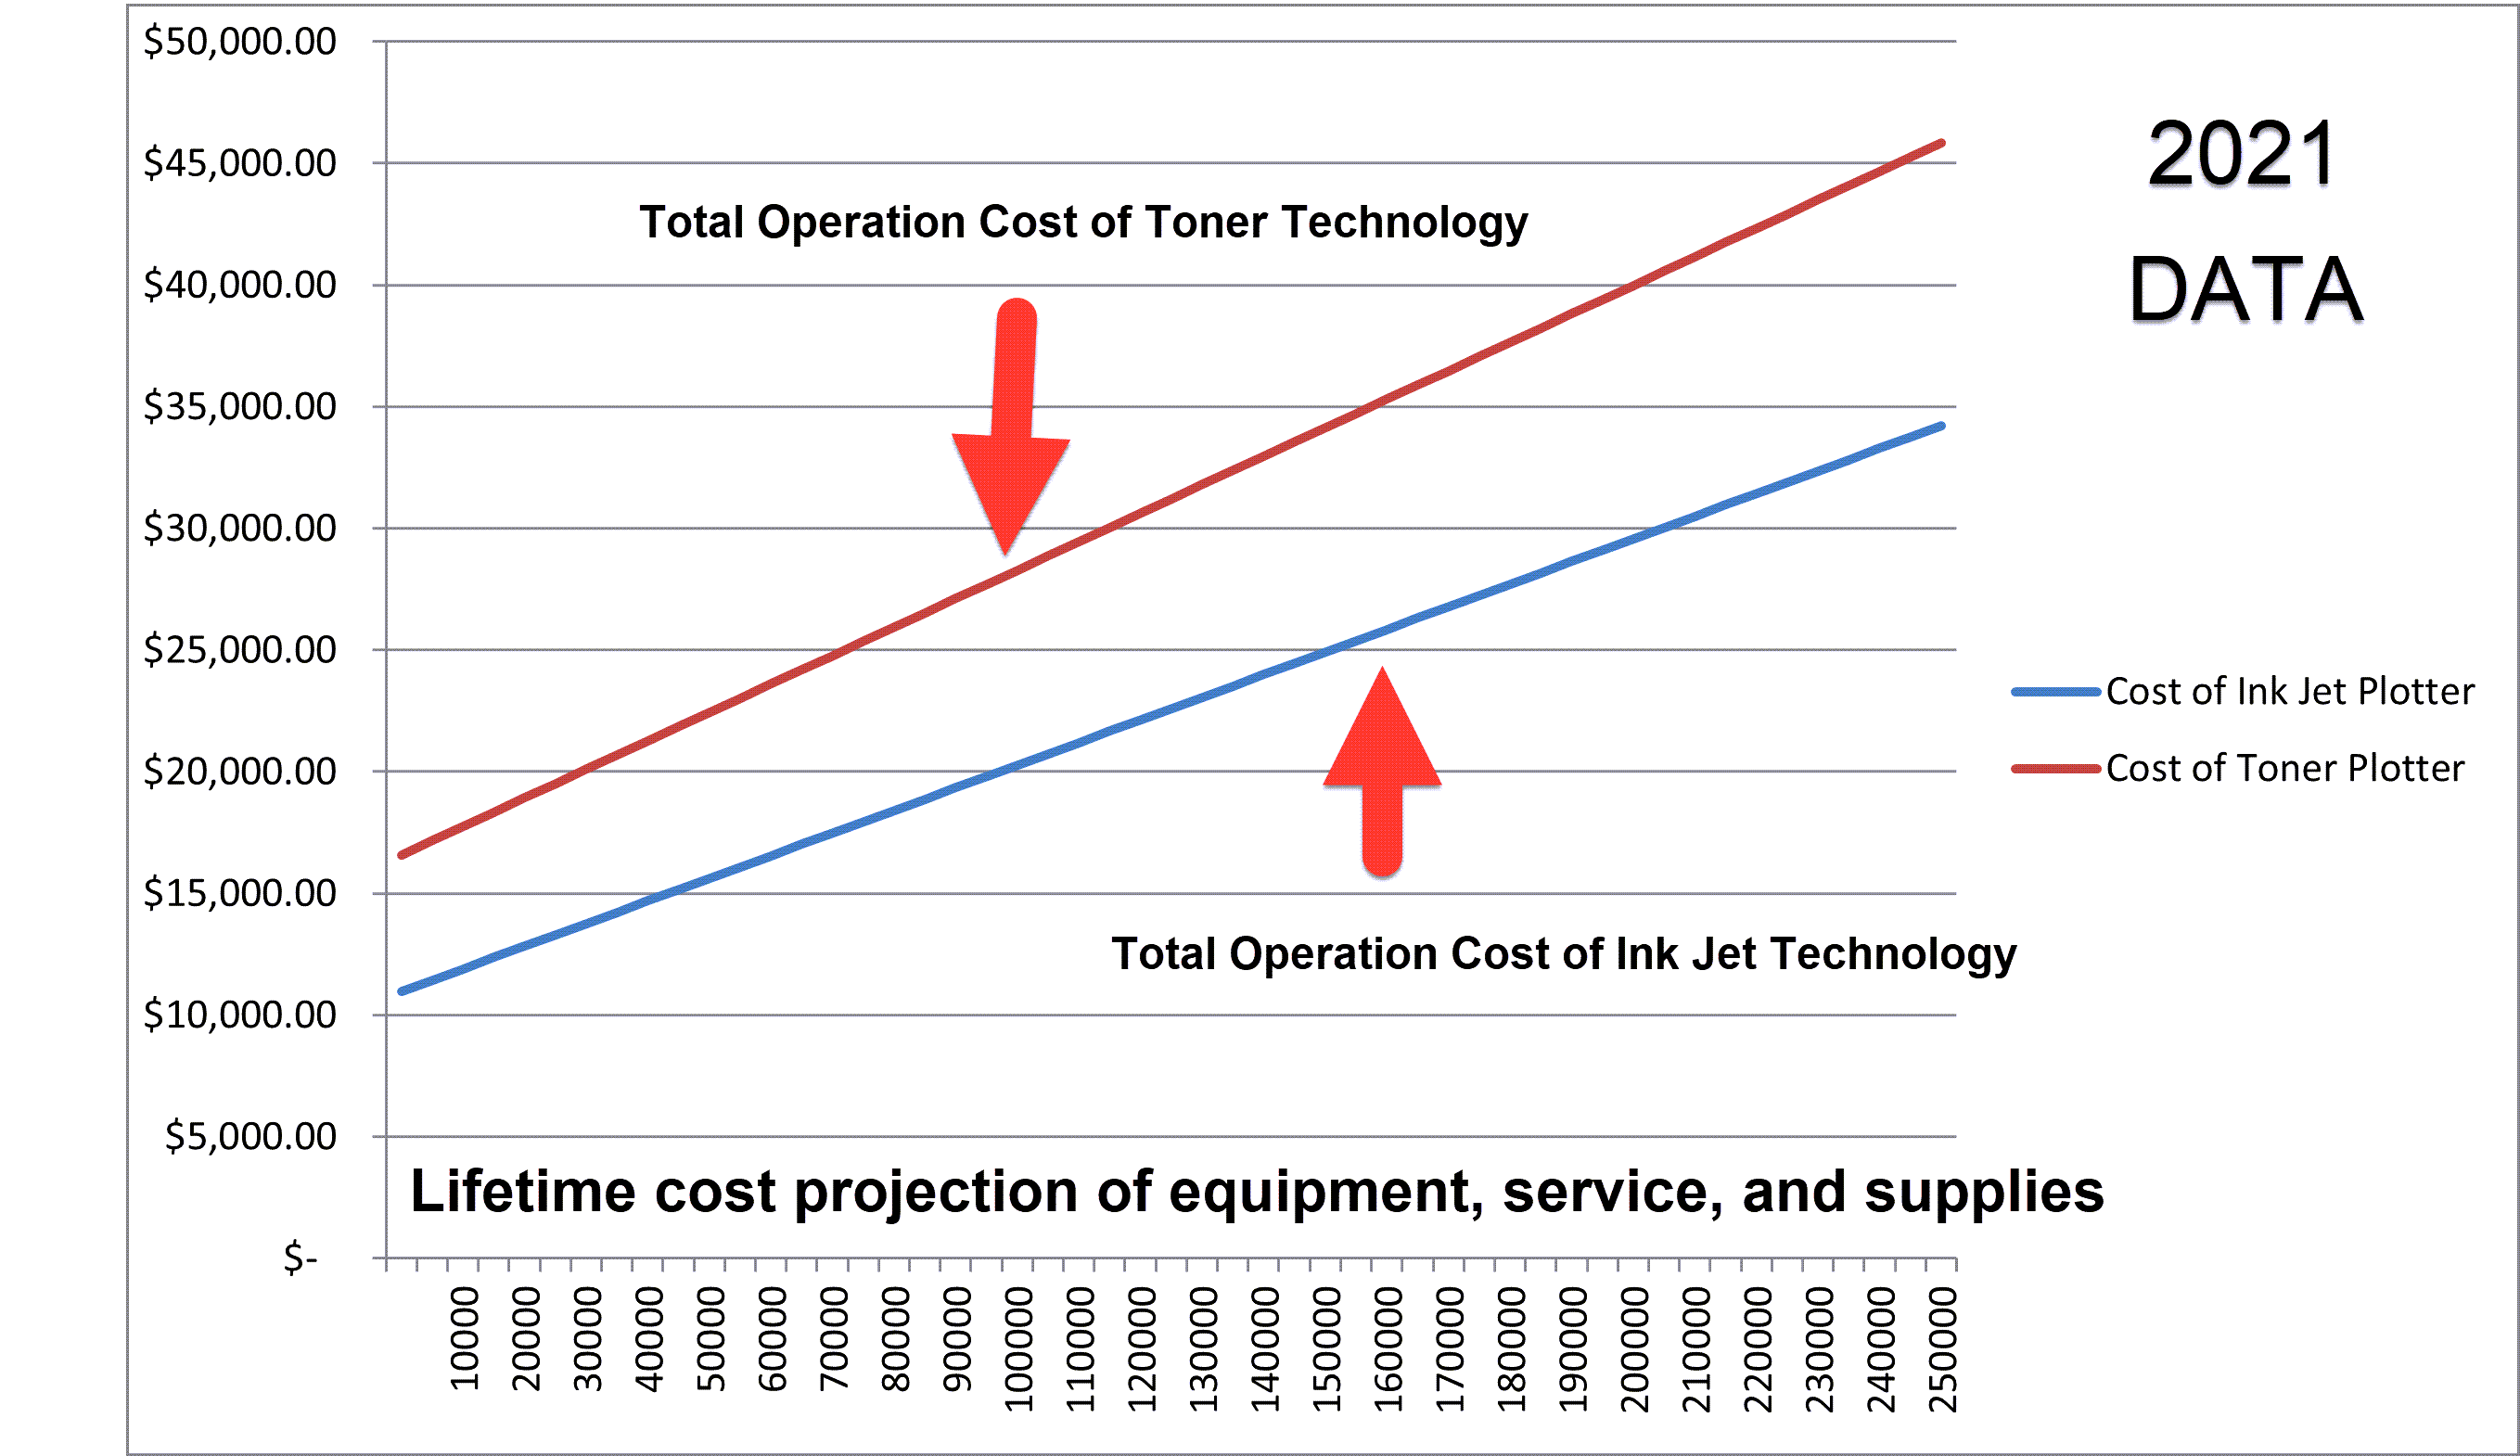 Operational Costs - NEW 2021